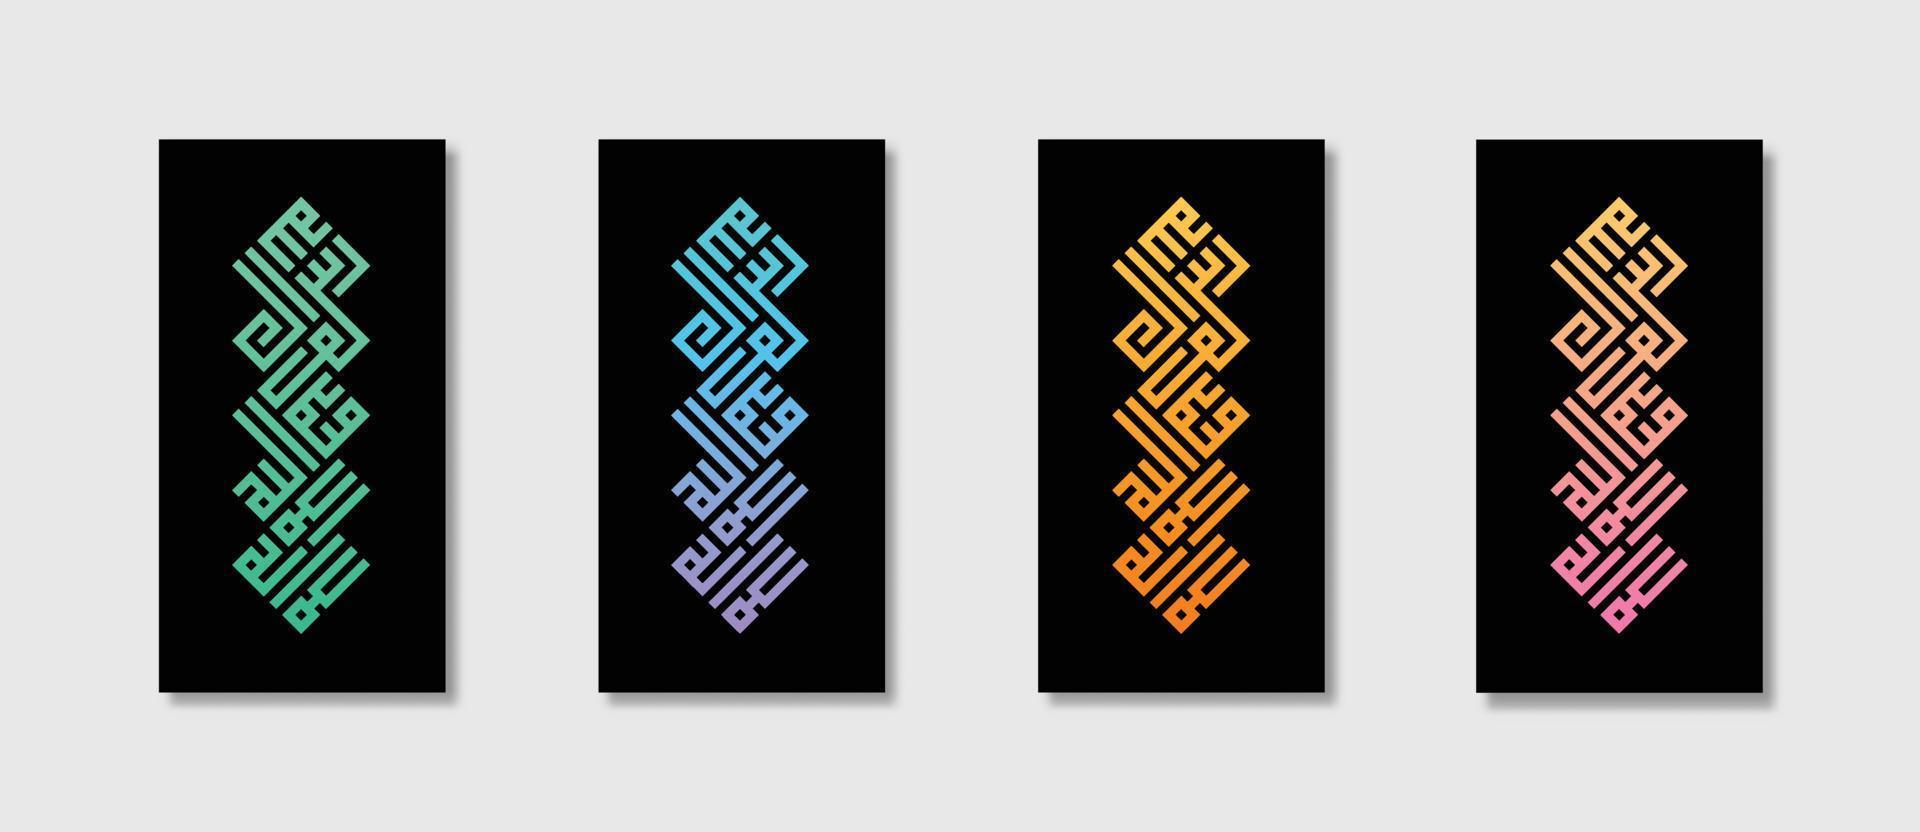 Kufi arabic calligraphy 'Laa Ilaaha Illallah' and 'Muhammad Rasulullah' that means 'There is no God but Allah' and 'Muhammad is the messenger of Allah with four different color styles. Ready to print. vector